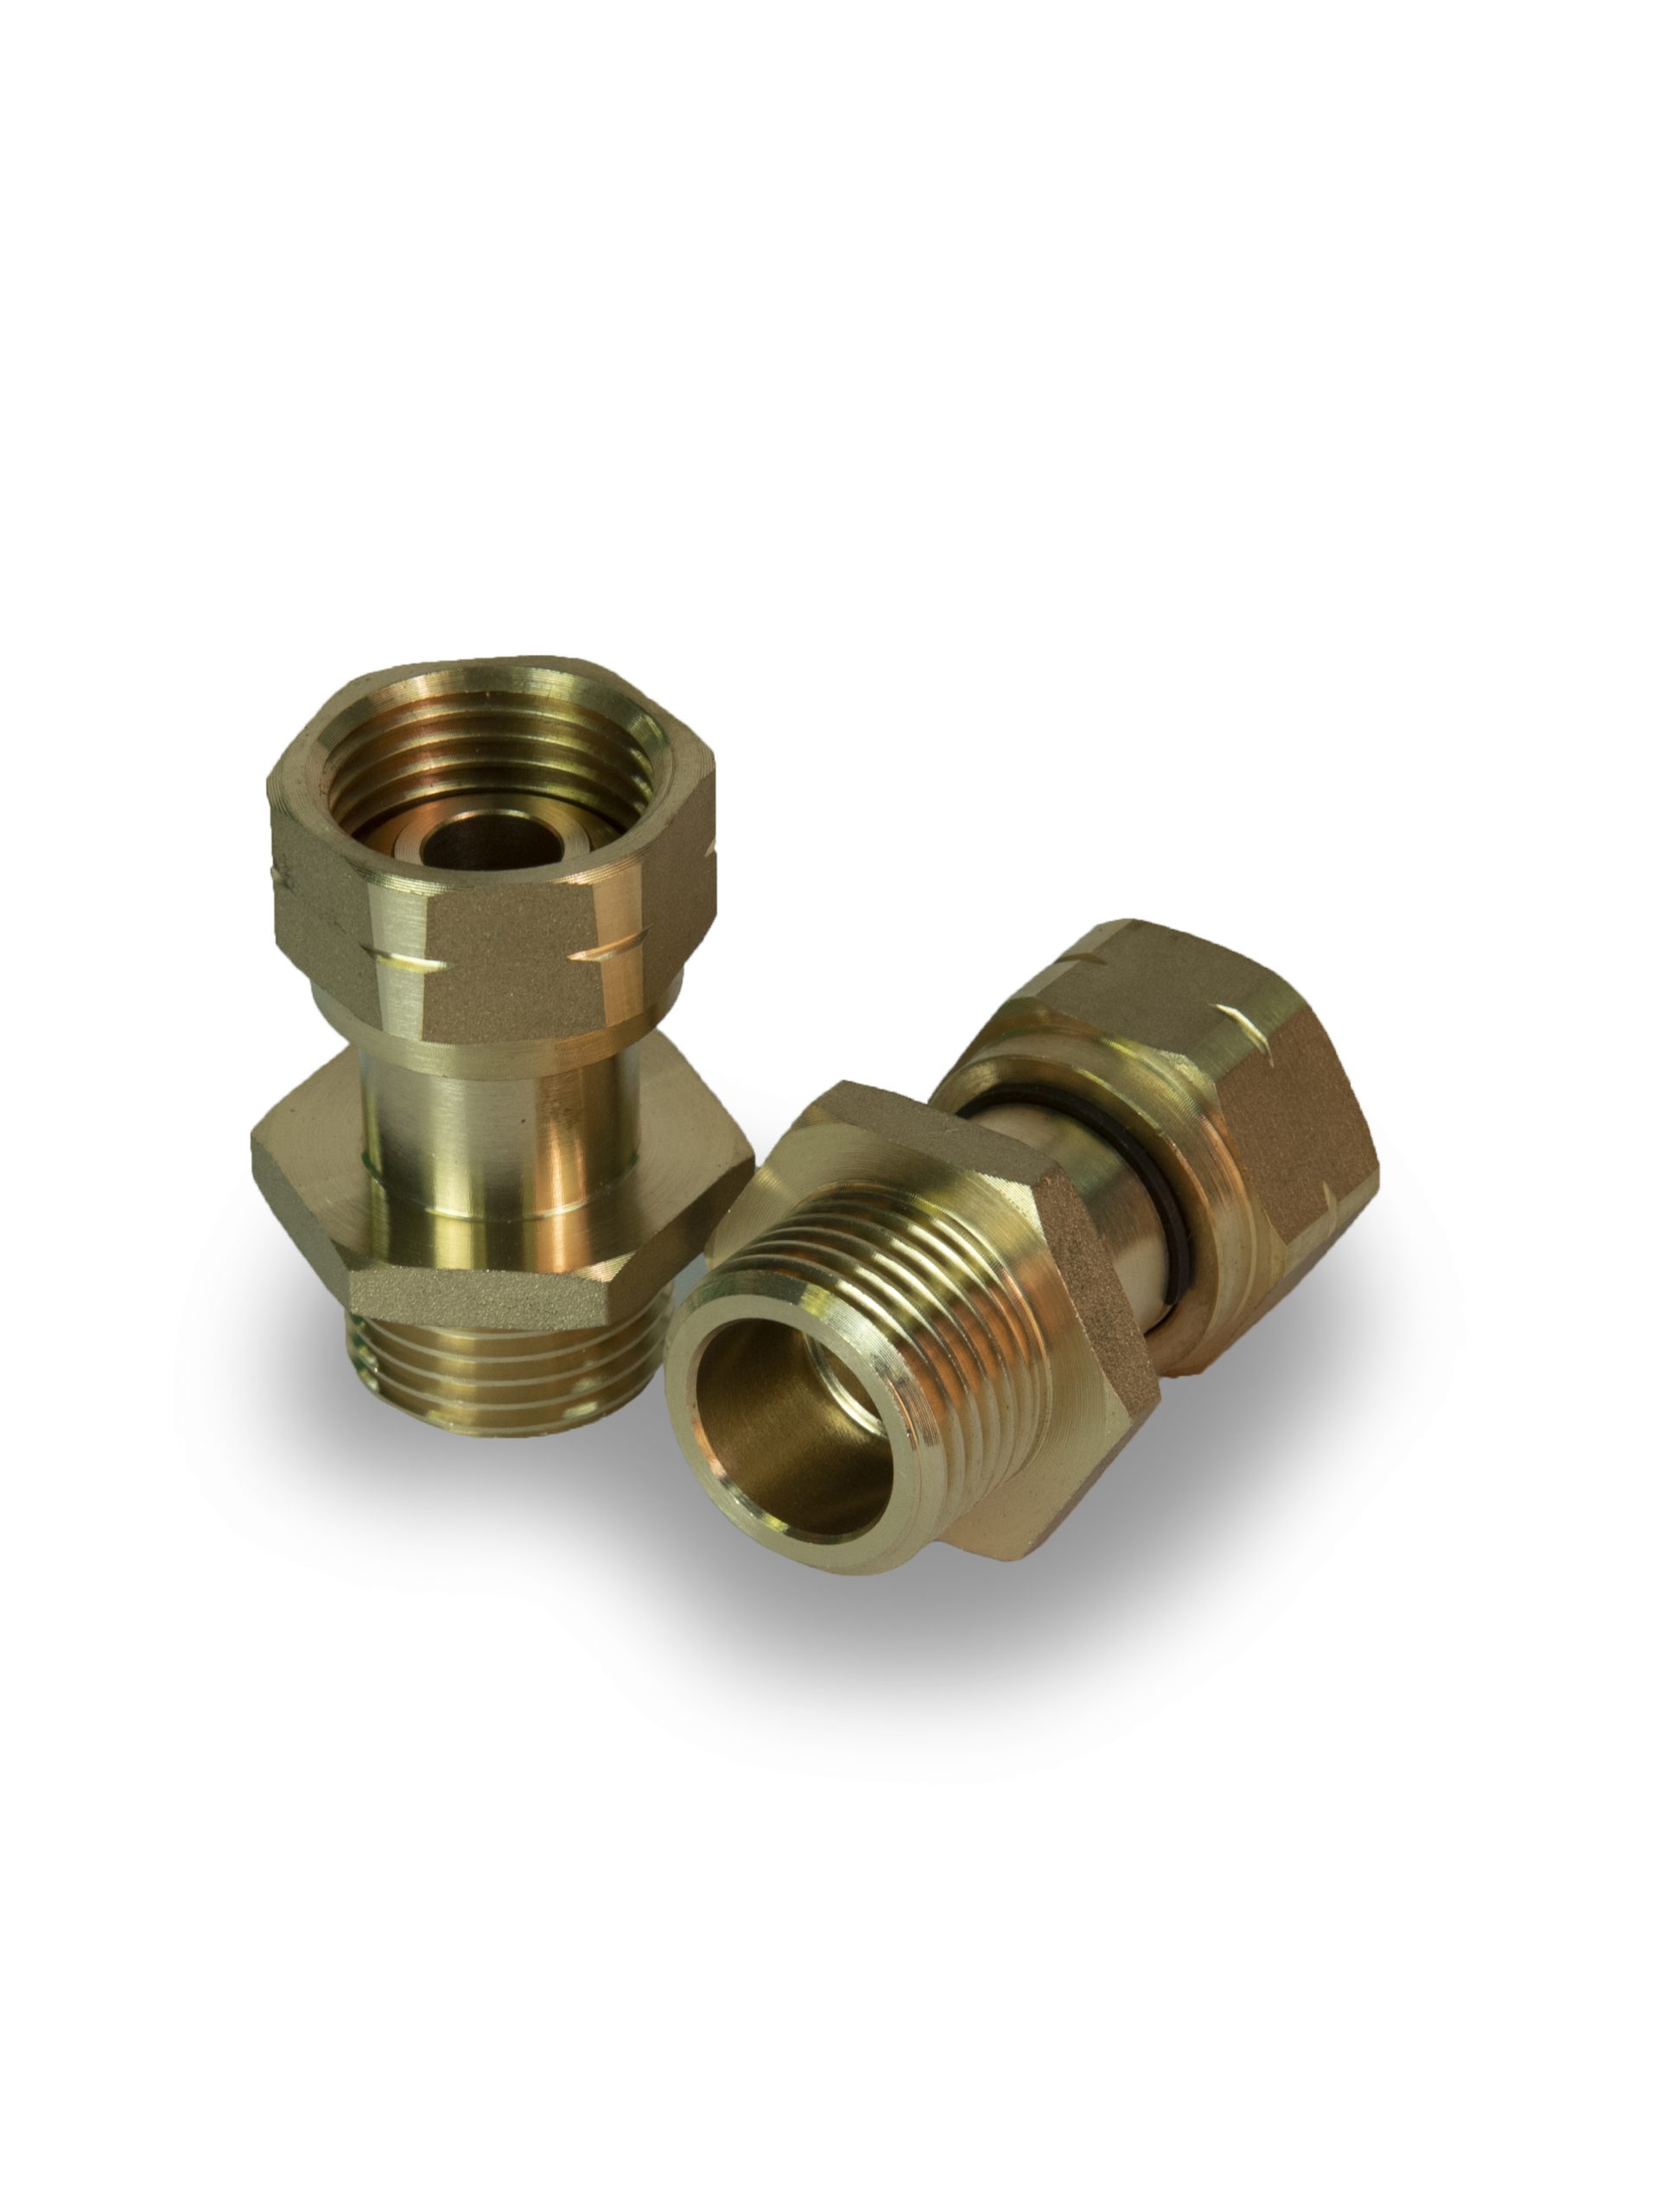 BRASS CONNECTOR MALE TO FEMALE 1/2 Inches X 1/2 Inches from Gas Equipment Company Llc Abu Dhabi, UNITED ARAB EMIRATES